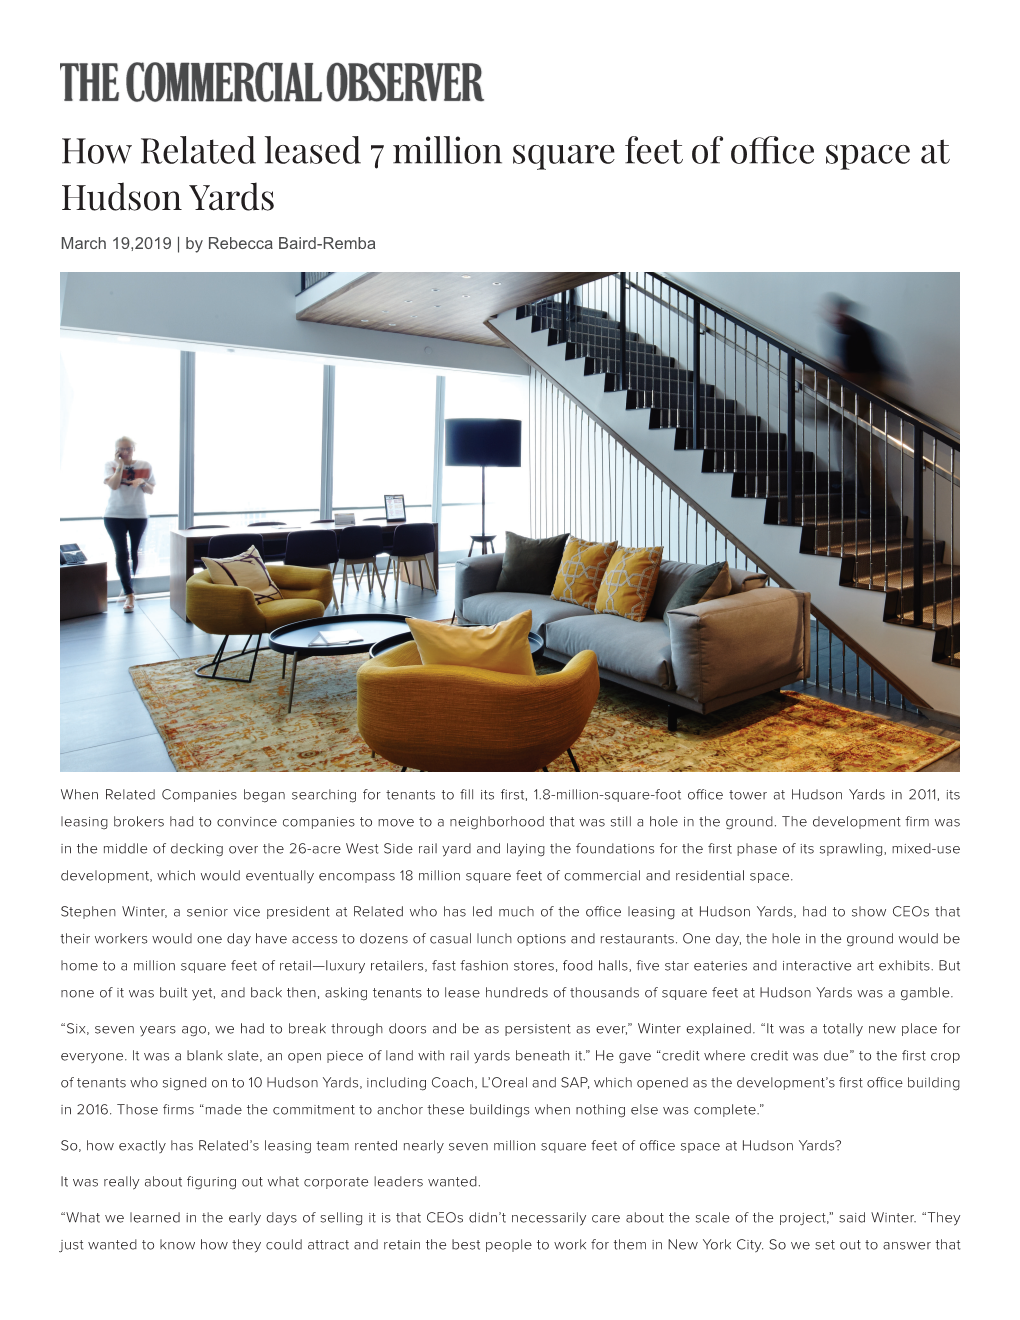 How Related Leased 7 Million Square Feet of Office Space at Hudson Yards